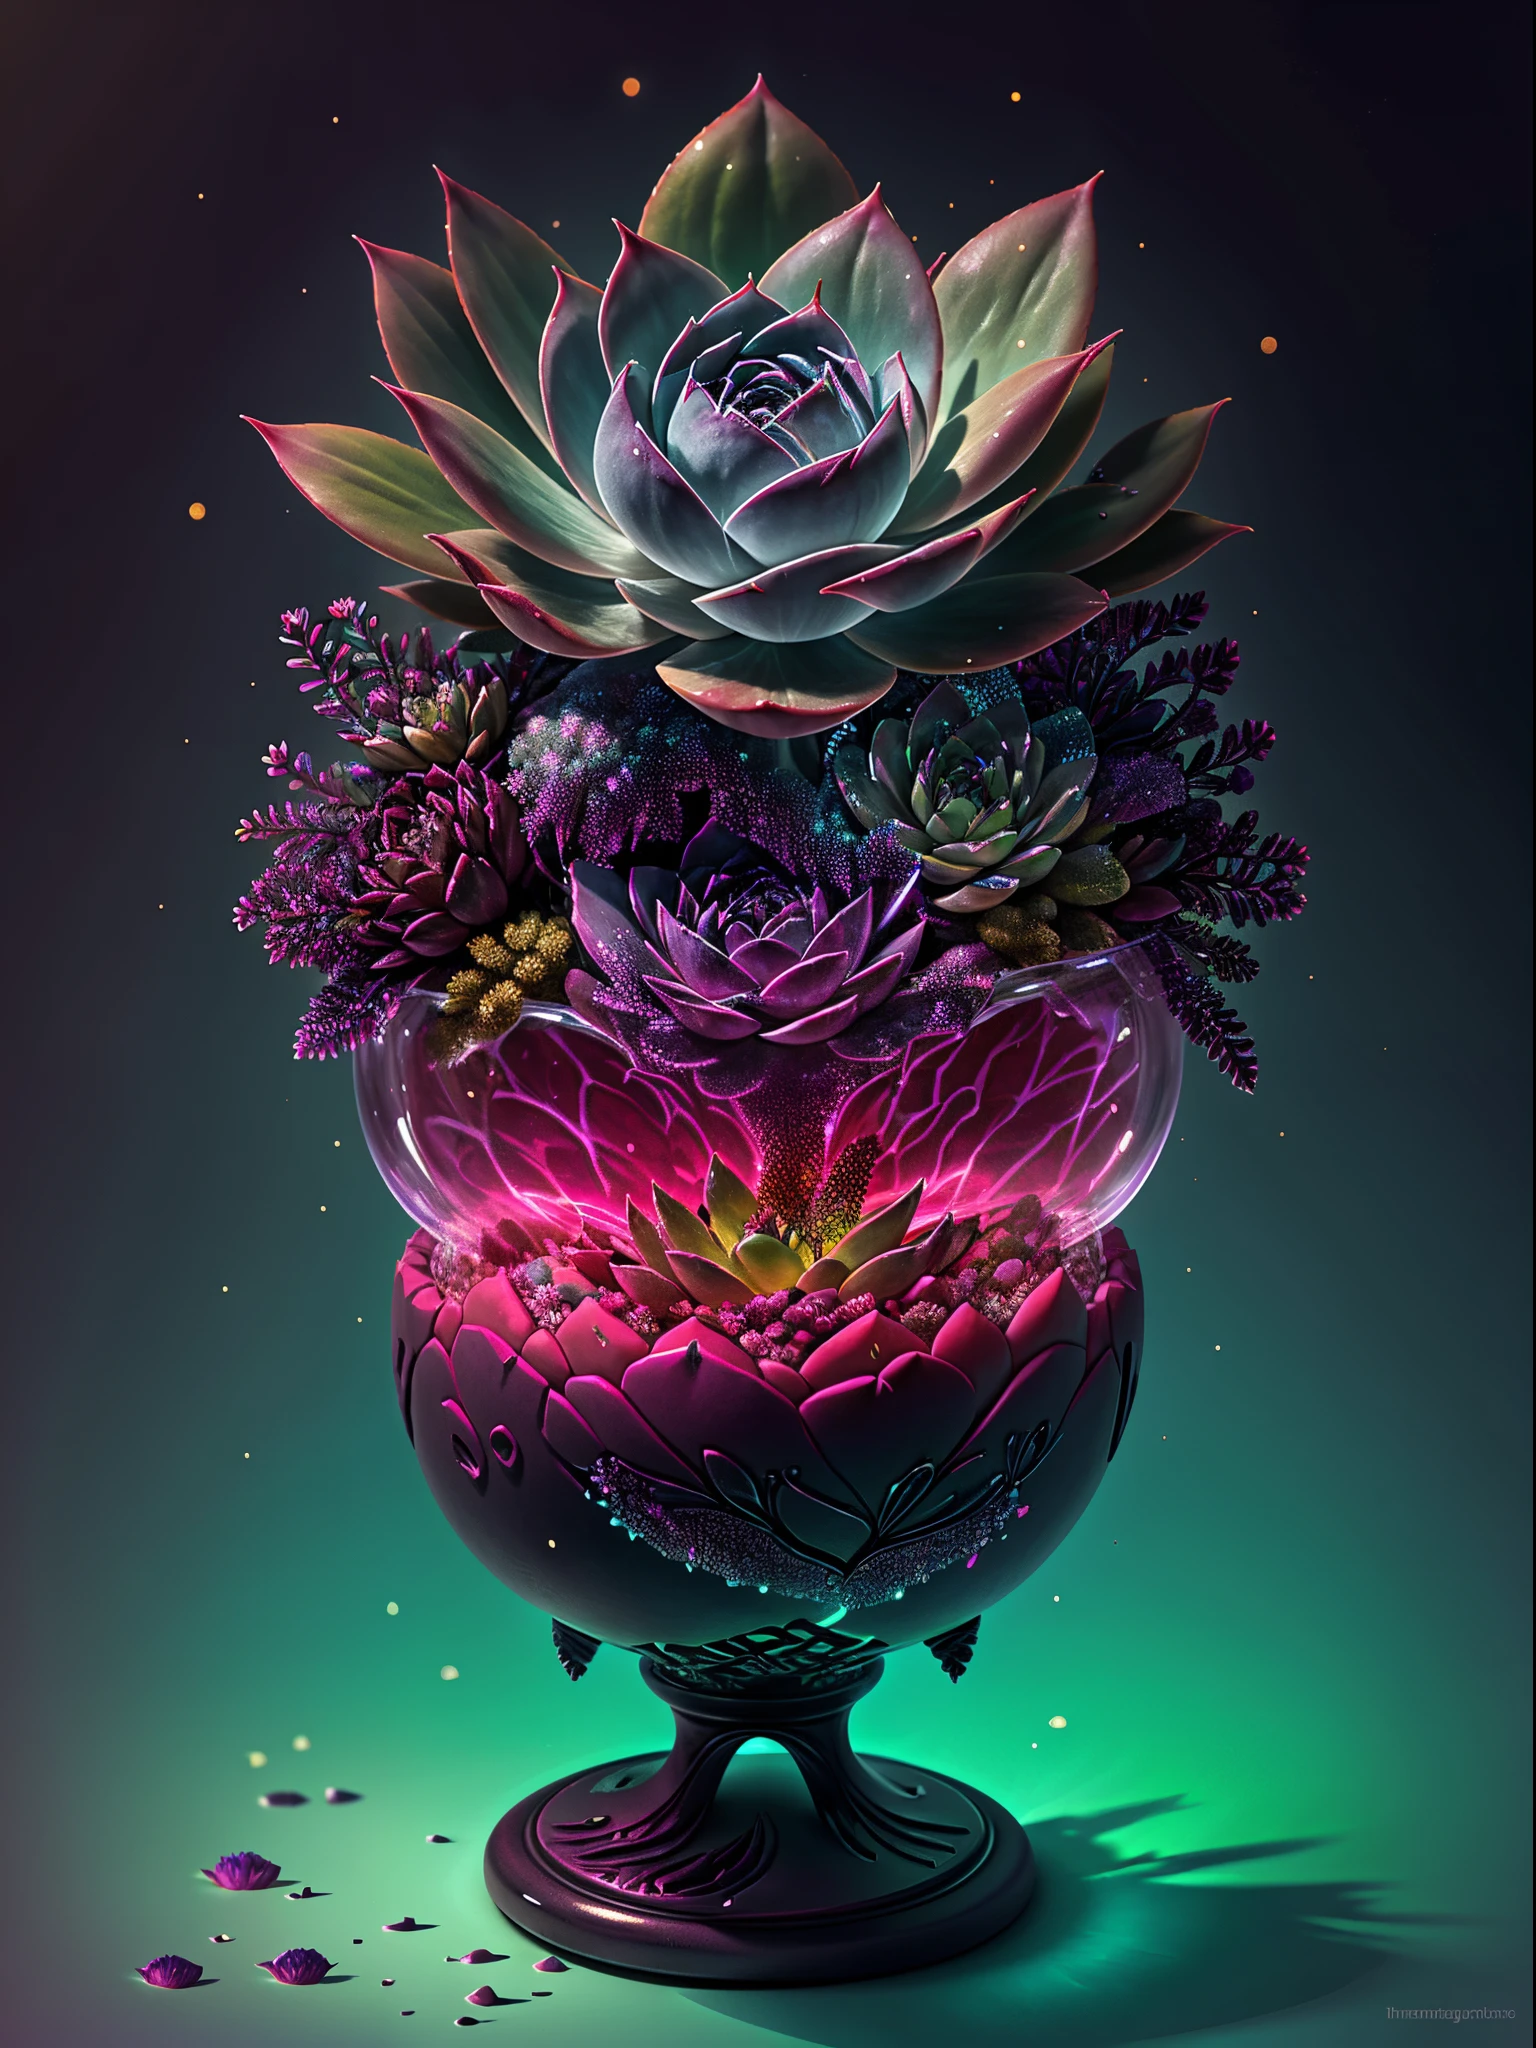 There&#39;s a succulent that glows in the dark，glowing succulents，Glowing succulent flowers，Crystal chalice placed on succulents，Amazing colorful succulent flowers，Surreal pregnant flower，glowing neon succulents，Glowing delicate succulent flowers, ，Ghibli-like colours, Pixar, UHD, masterpiece, ccurate, anatomically correct, textured skin, super detail, high details, high quality, award winning, 16k, best quality